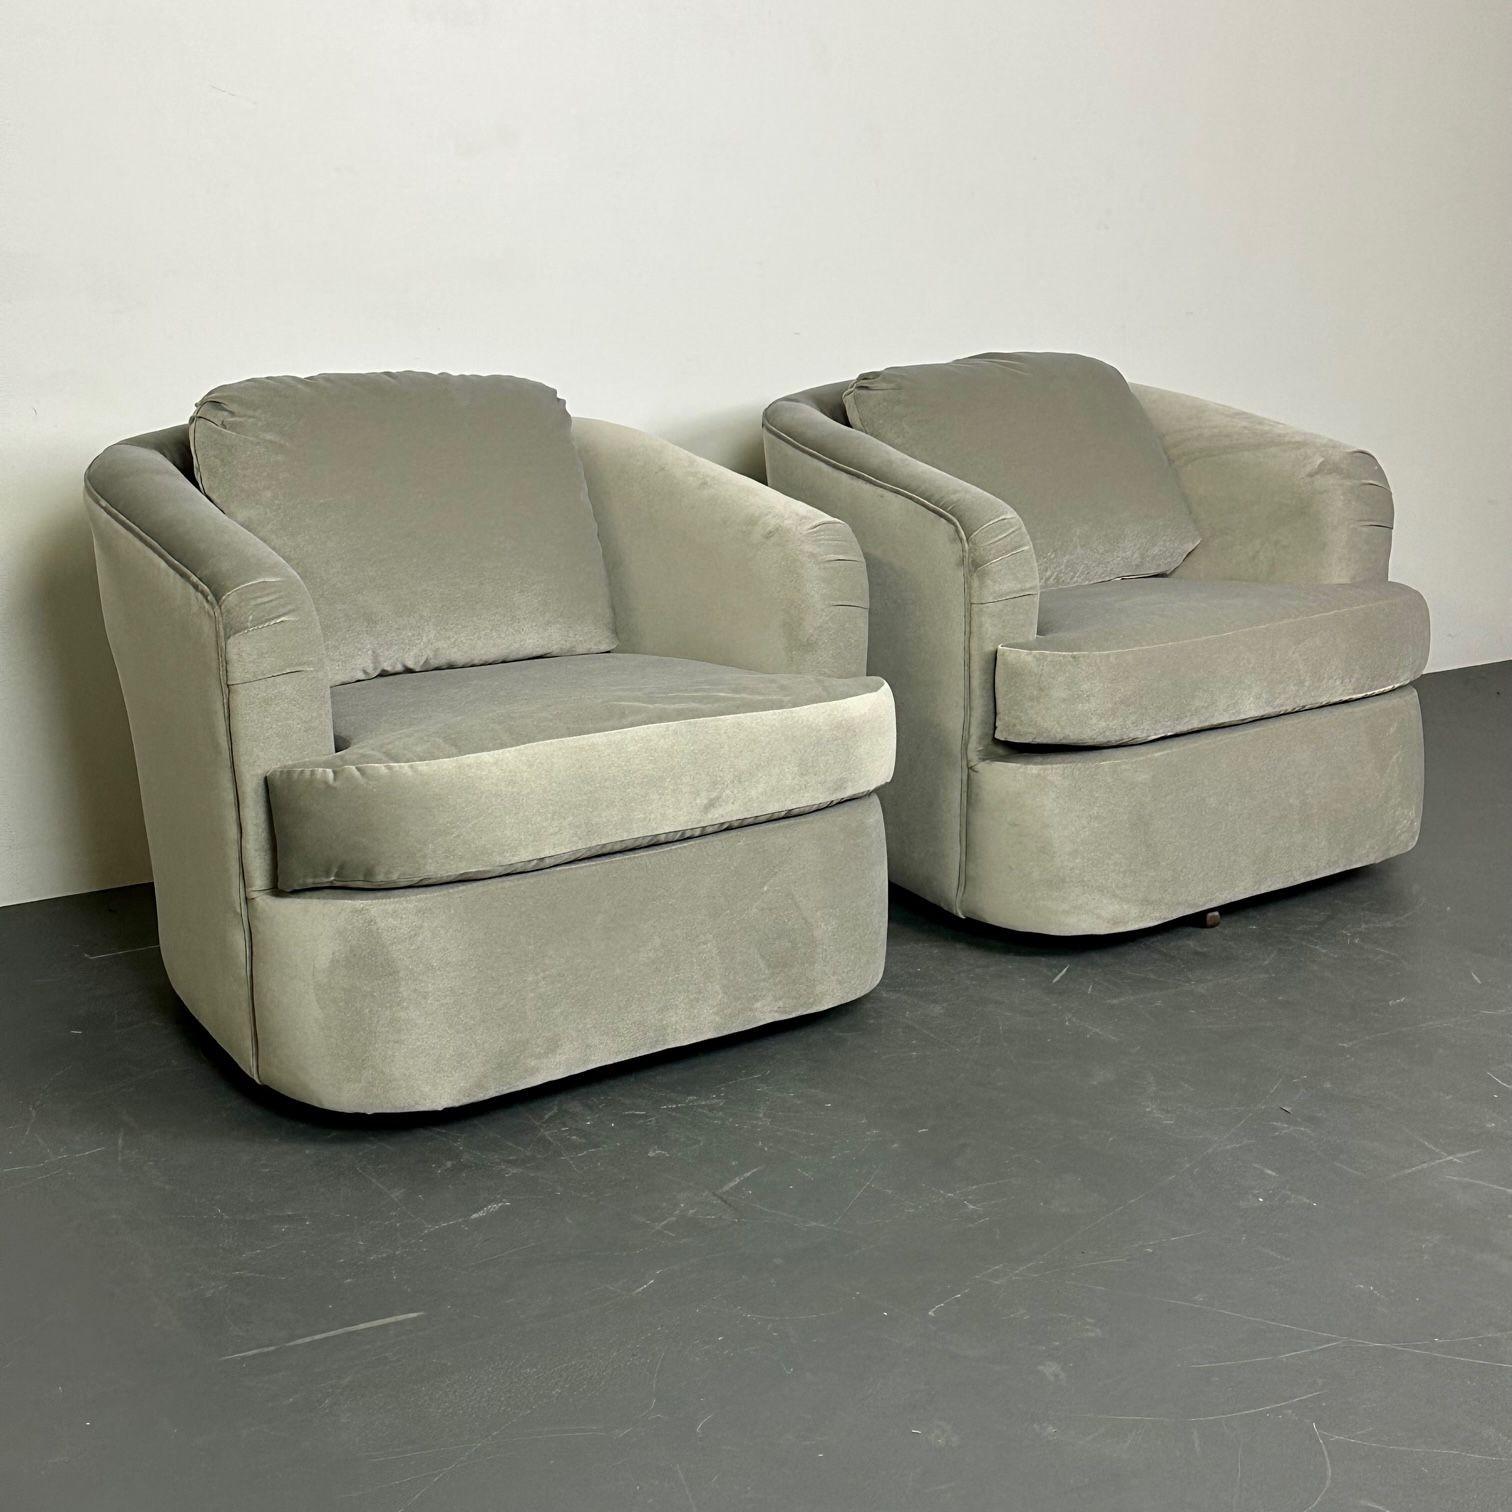 Pair of Velvet Mid-Century Modern Milo Baughman Style Swivel / Lounge Chairs In Good Condition For Sale In Stamford, CT